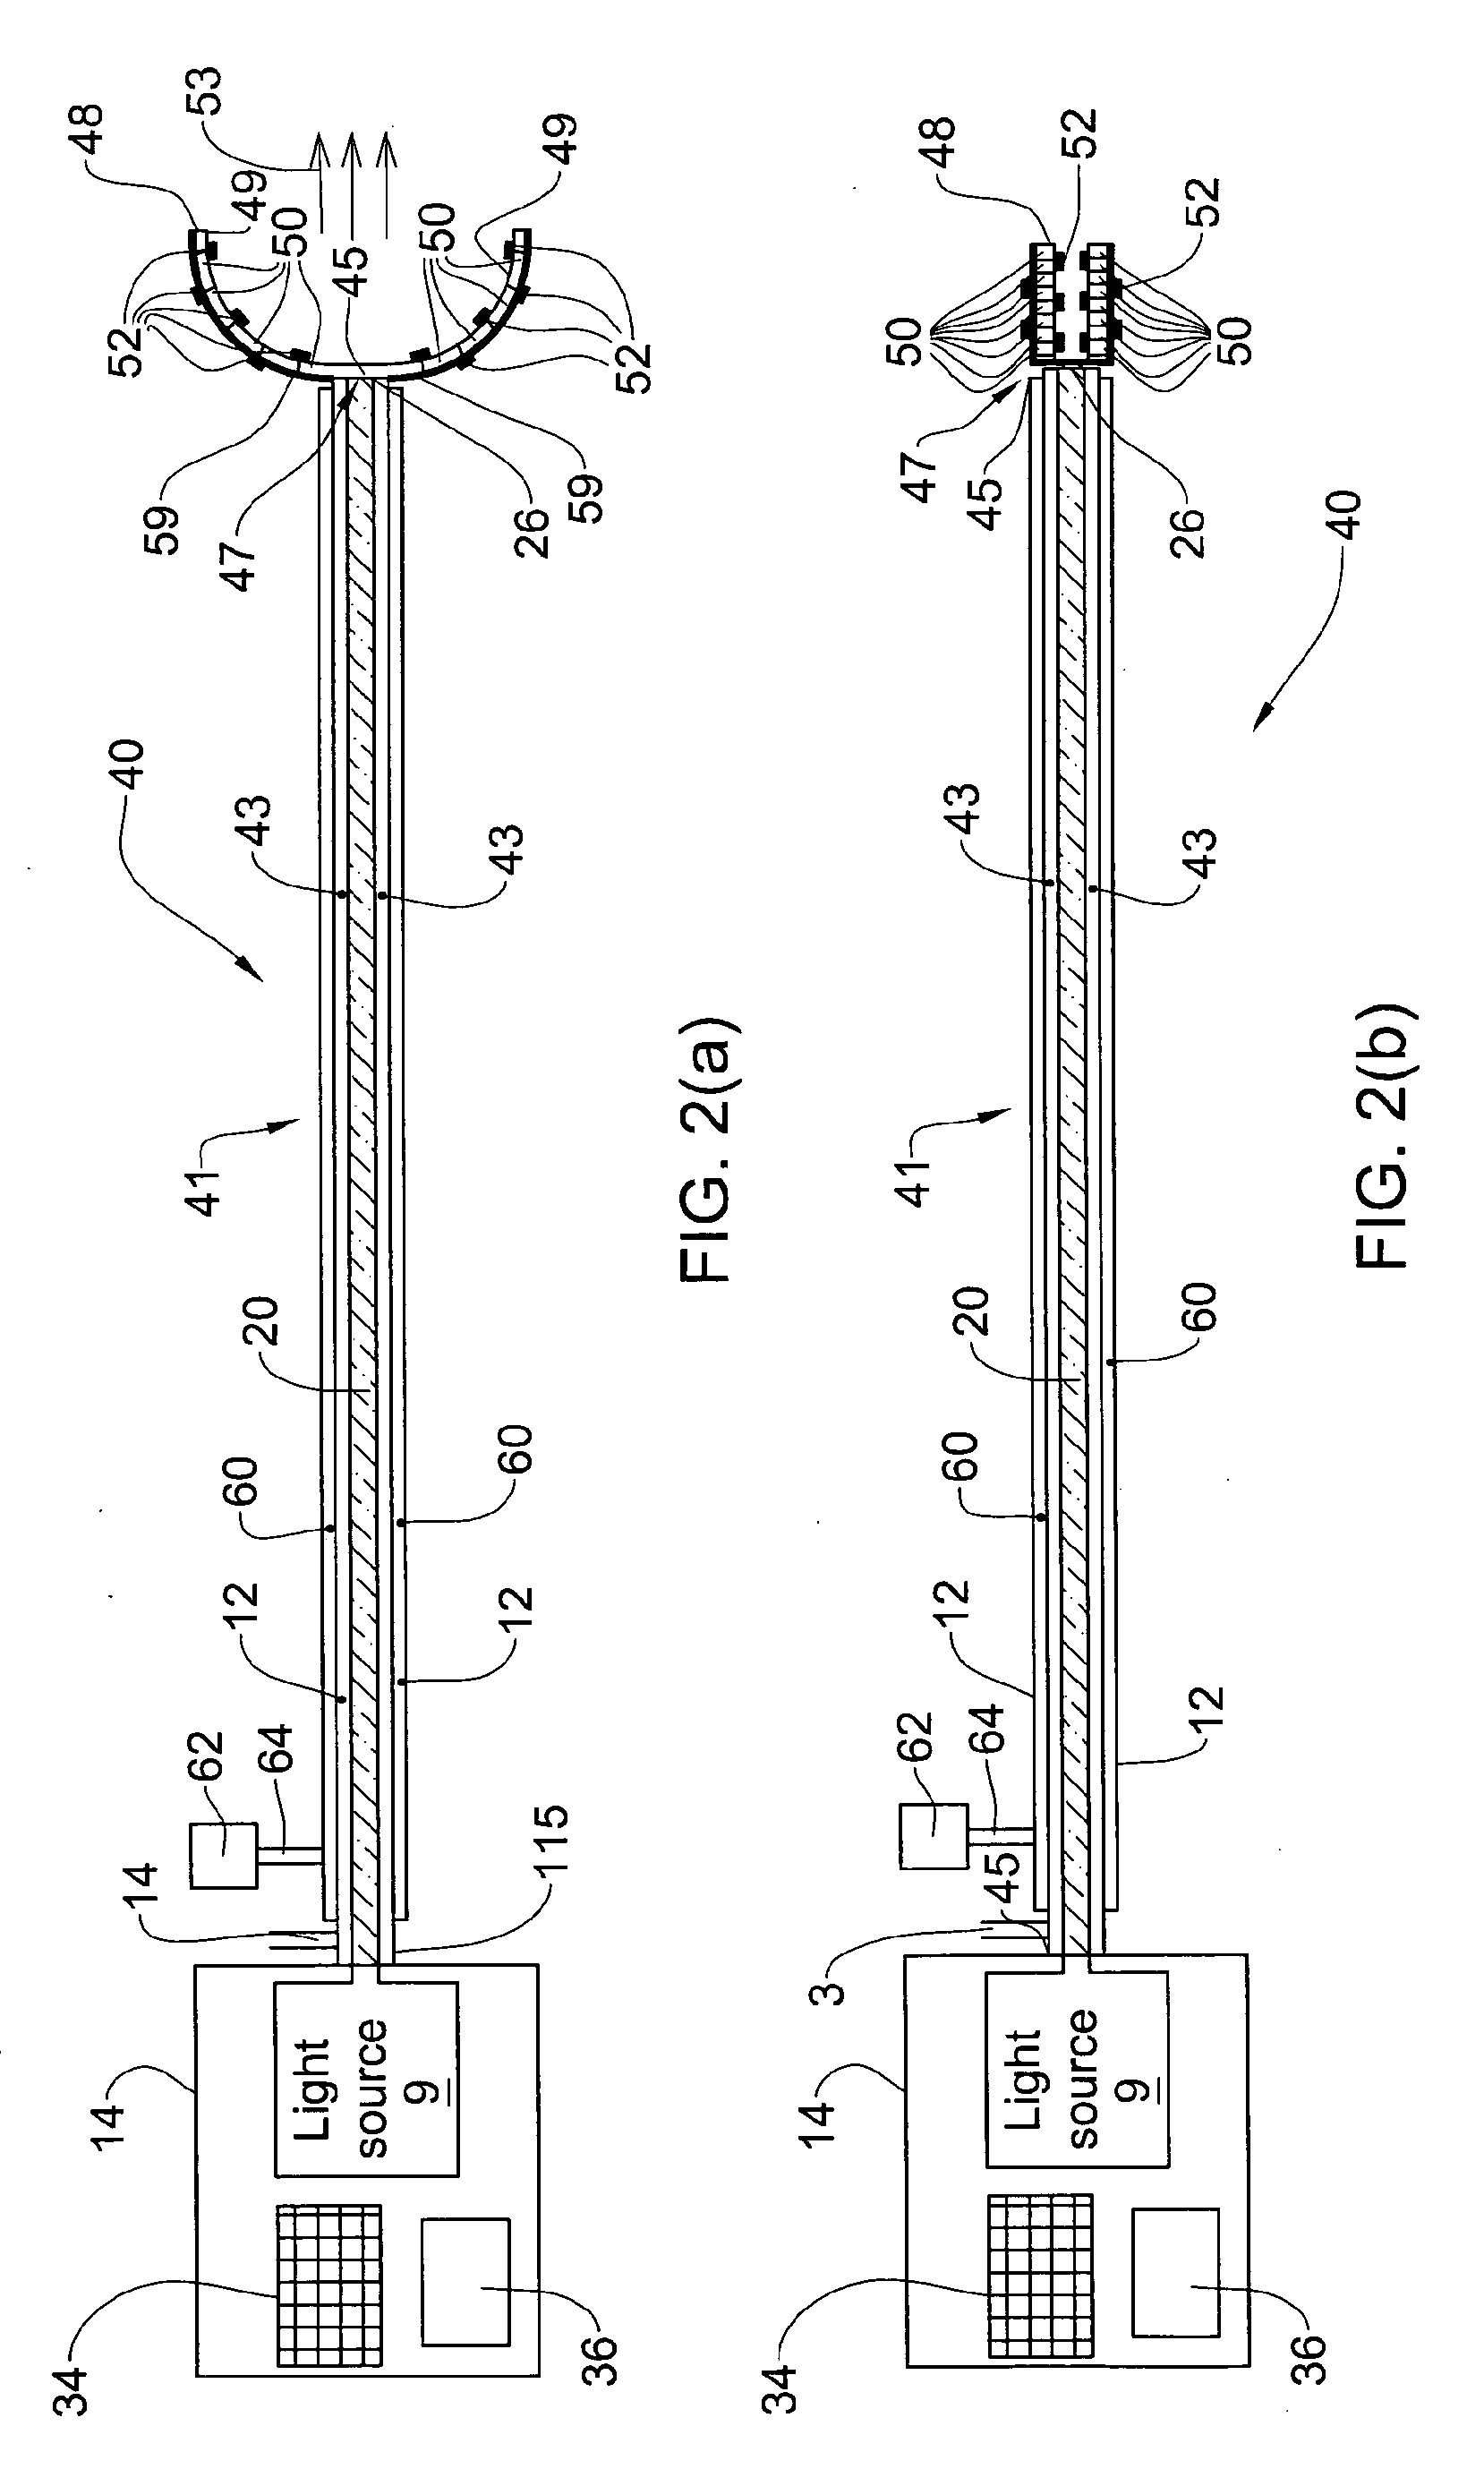 Device for irradiating an internal body surface